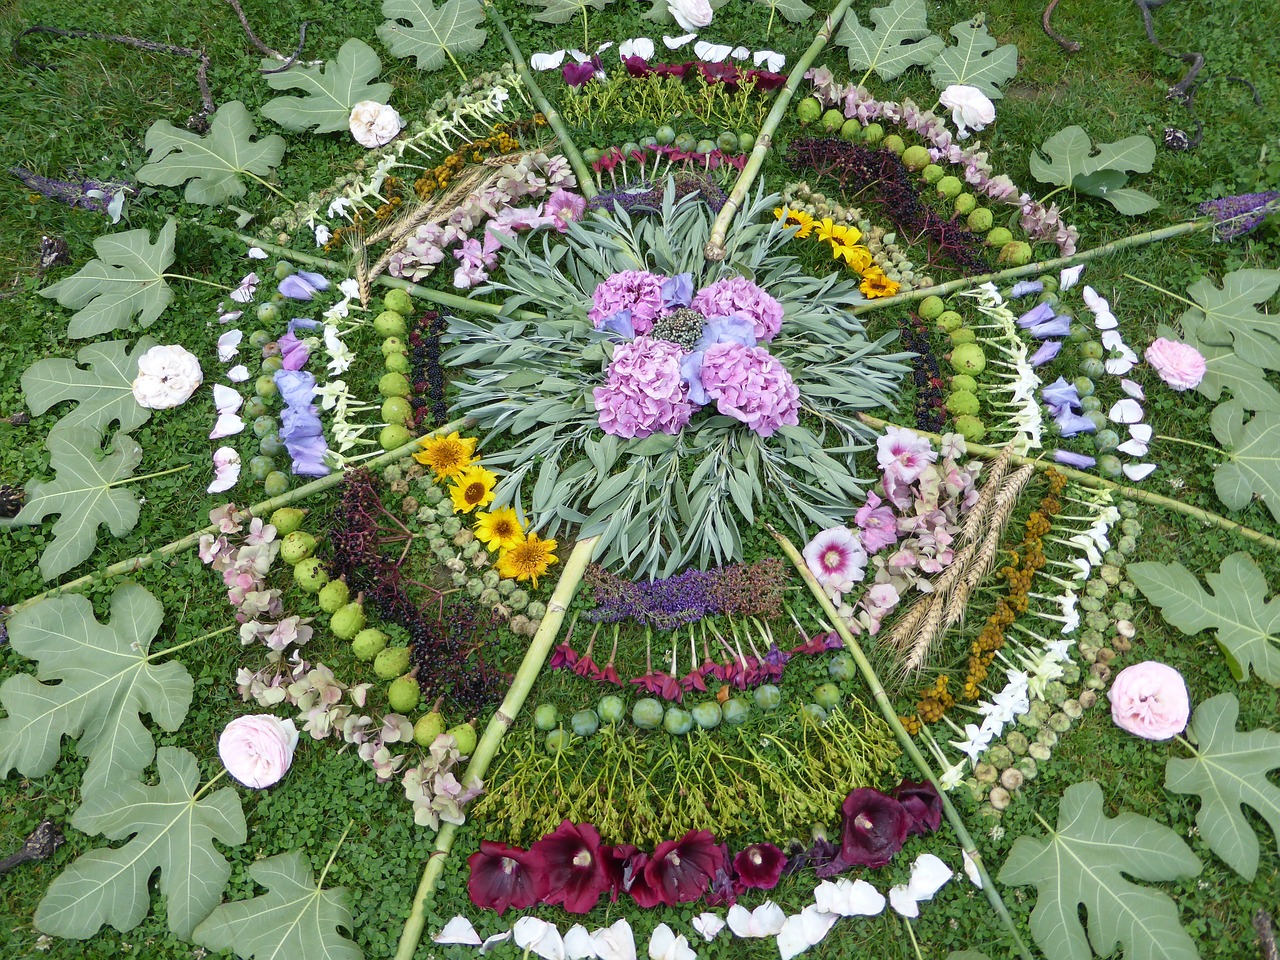 Mandala made of flowers and leaves